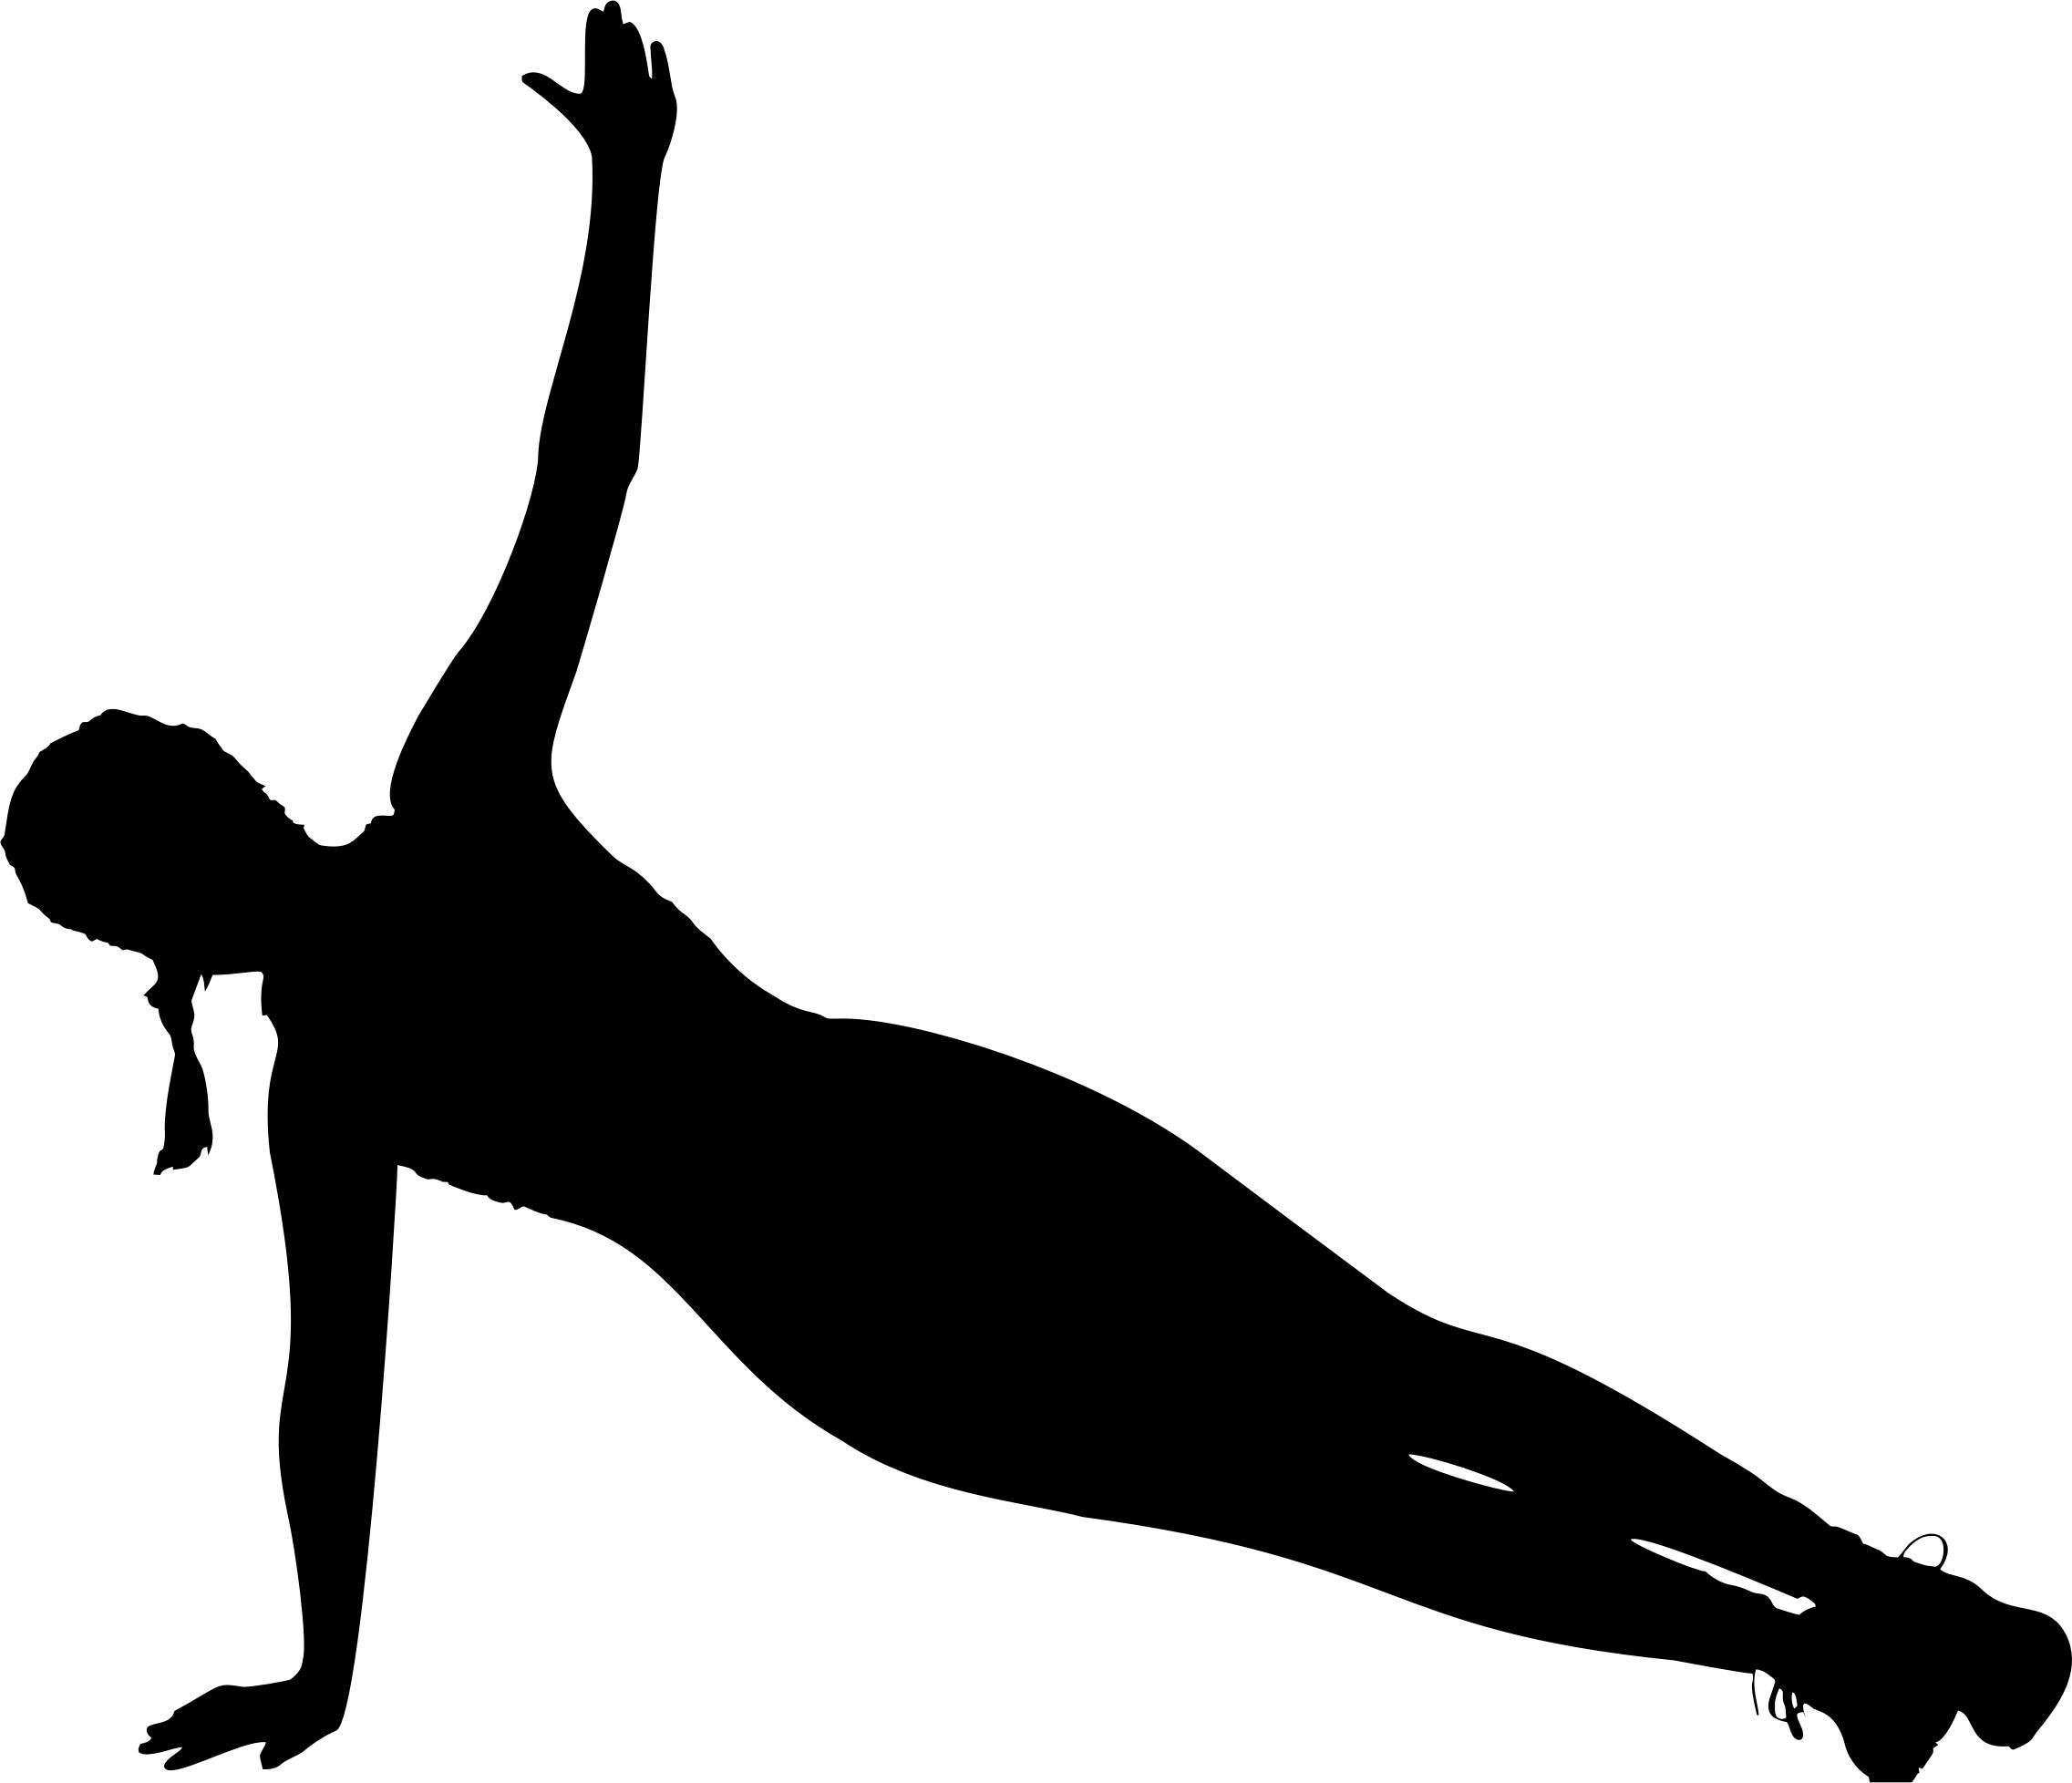 Fitness Woman Silhouette icons